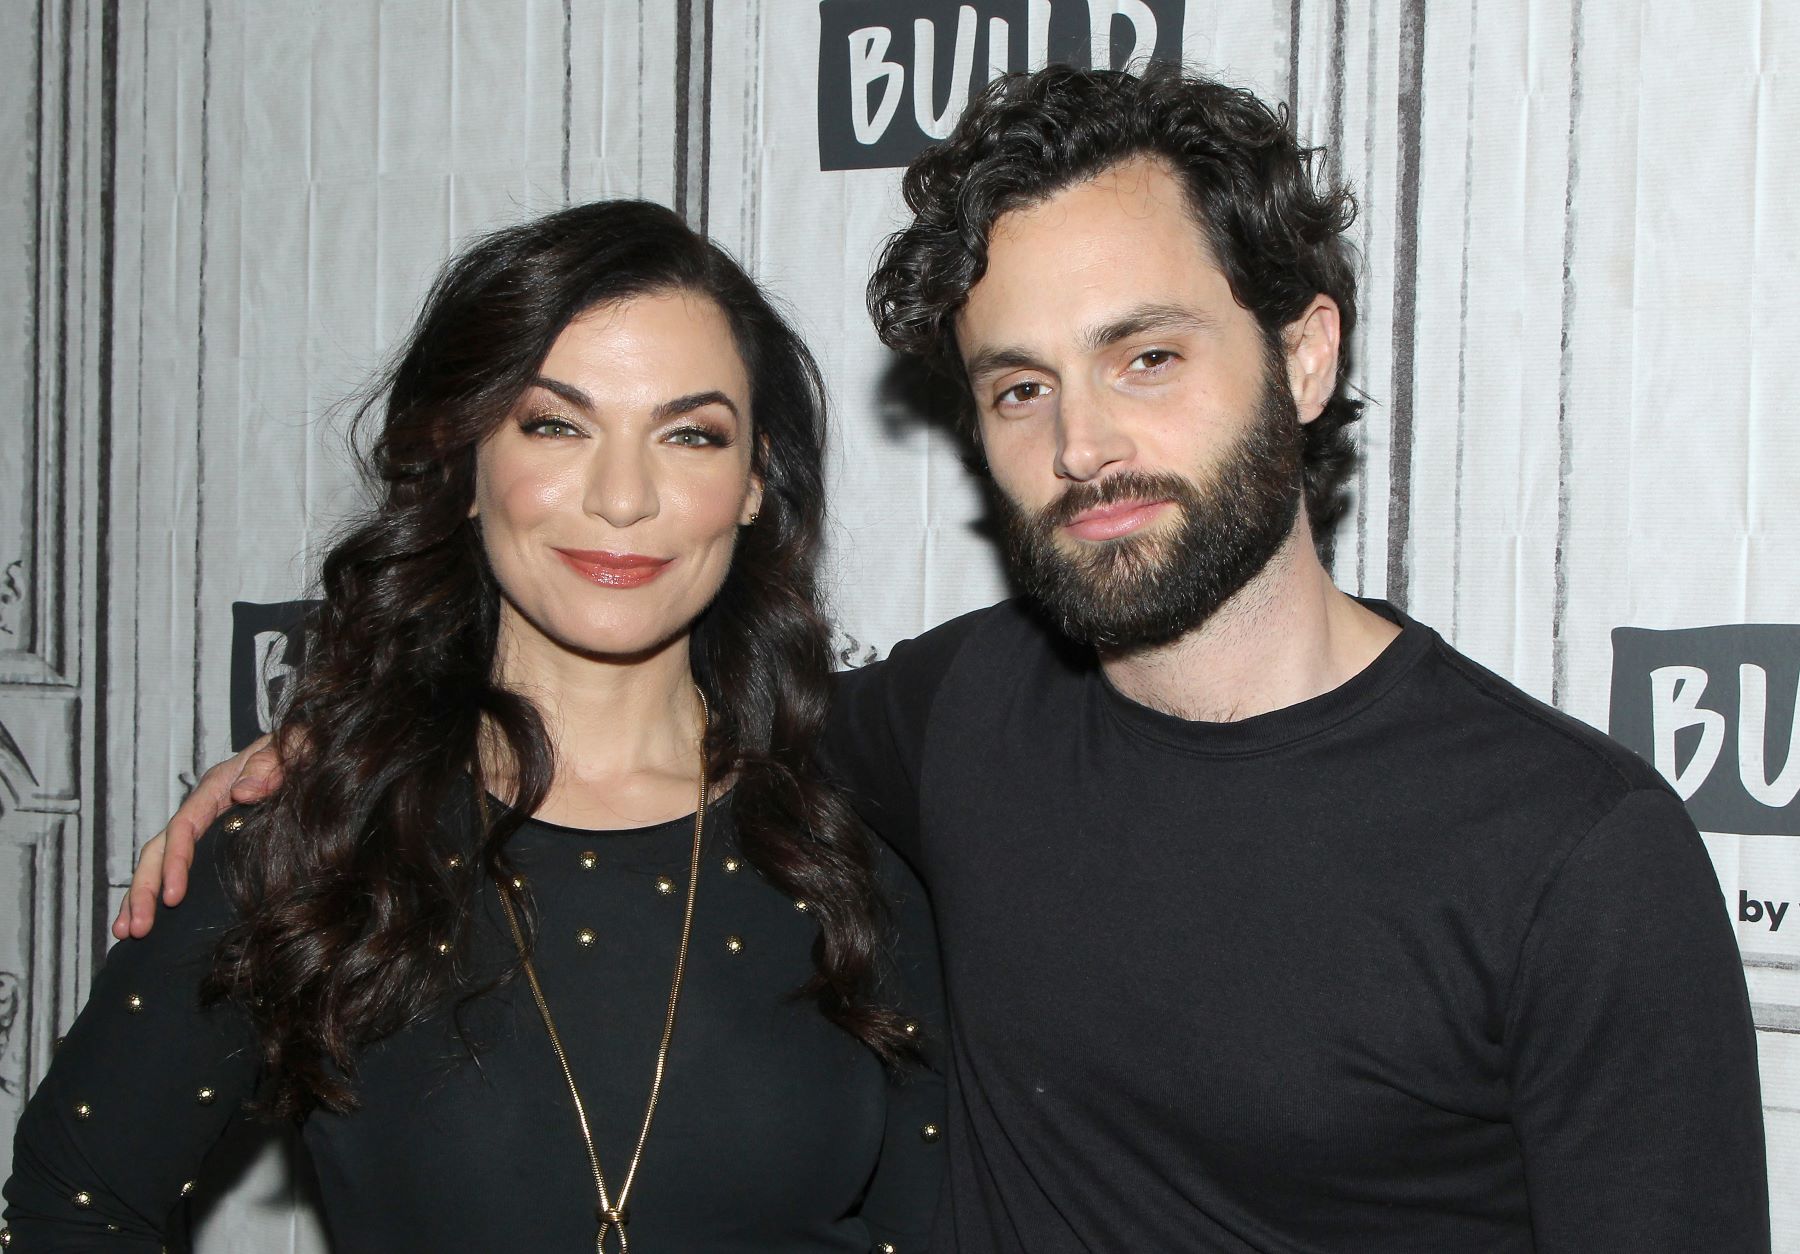 (L to R) Producer Sera Gamble and actor Penn Badgley of 'You' at Build Studio in New York City